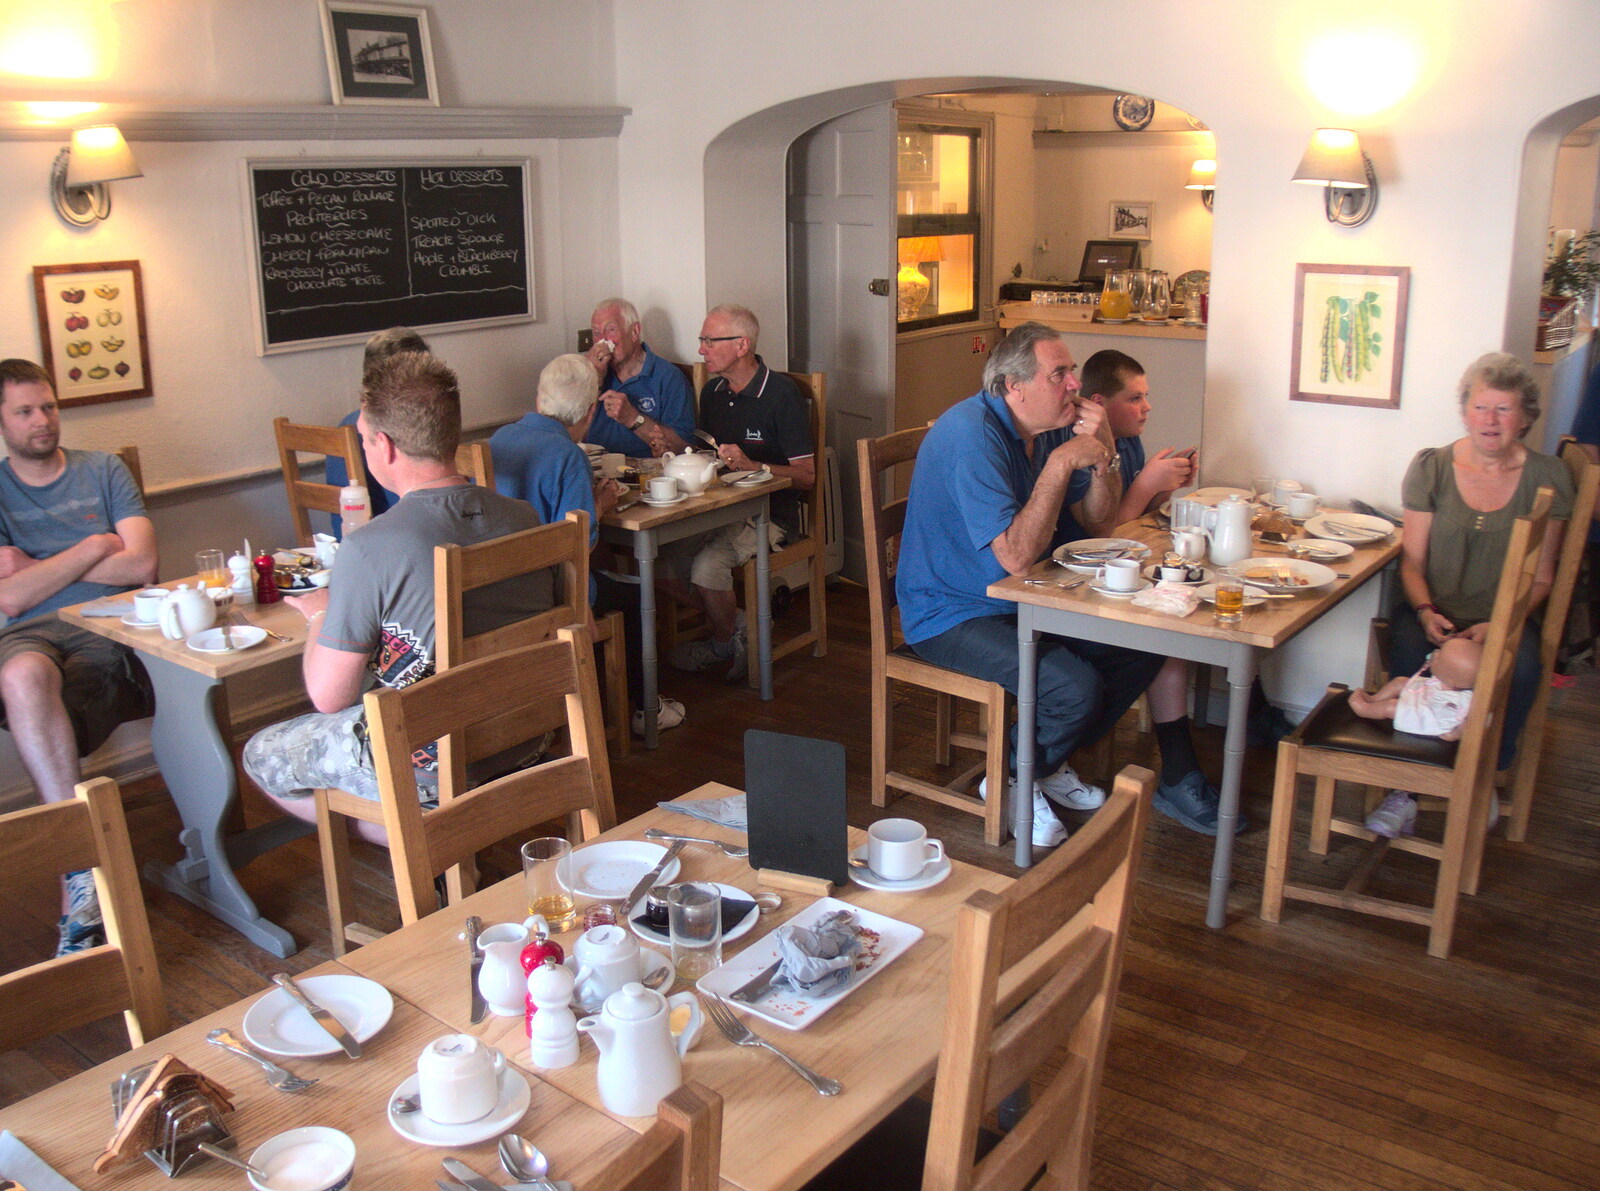 It's breakfast time for the BSCC riders from The BSCC Weekend Away, Holt, Norfolk - 12th May 2018